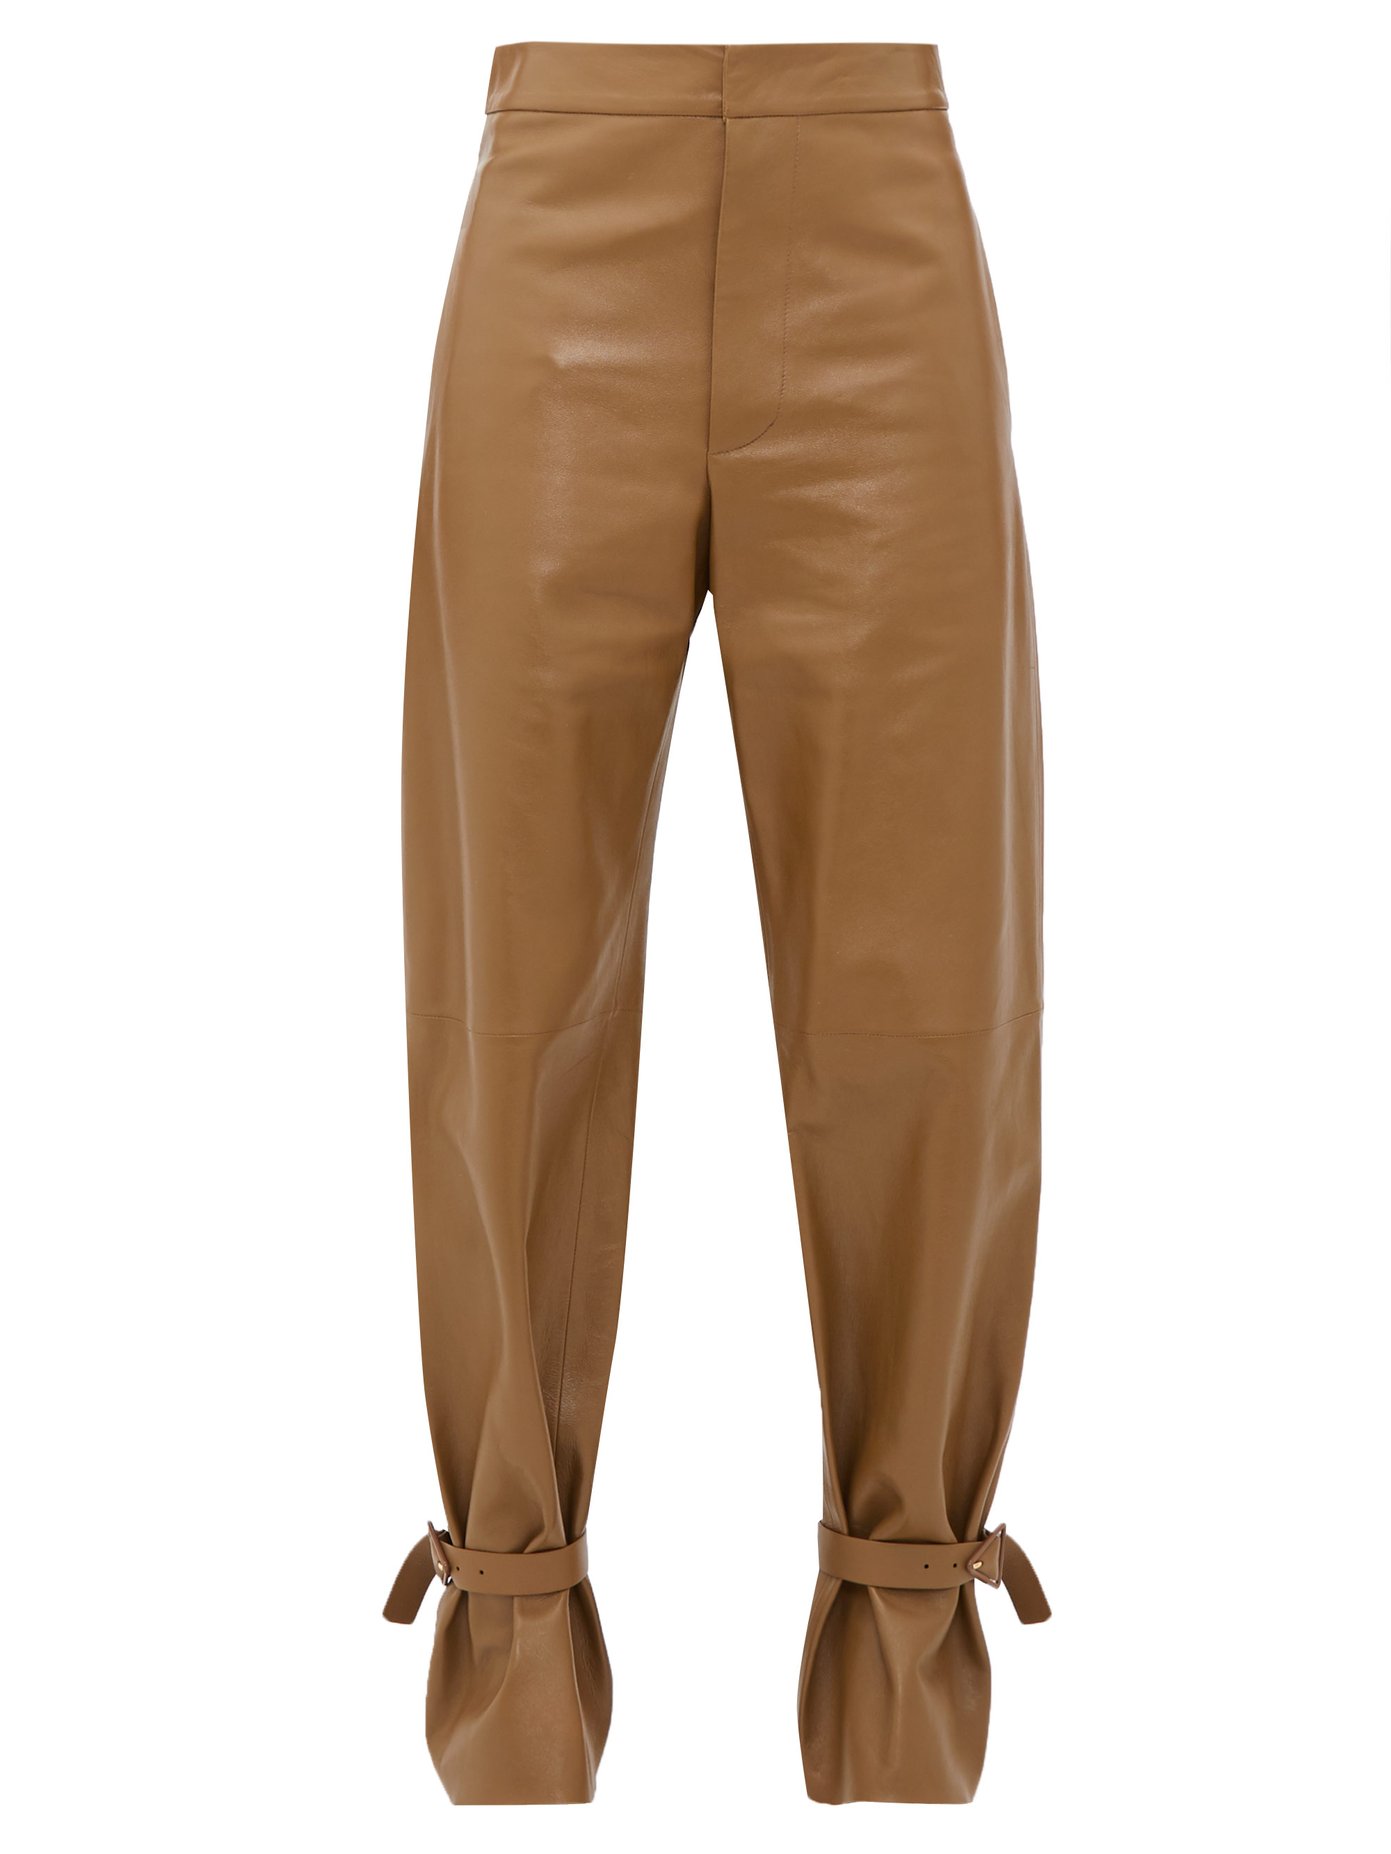 tan leather trousers